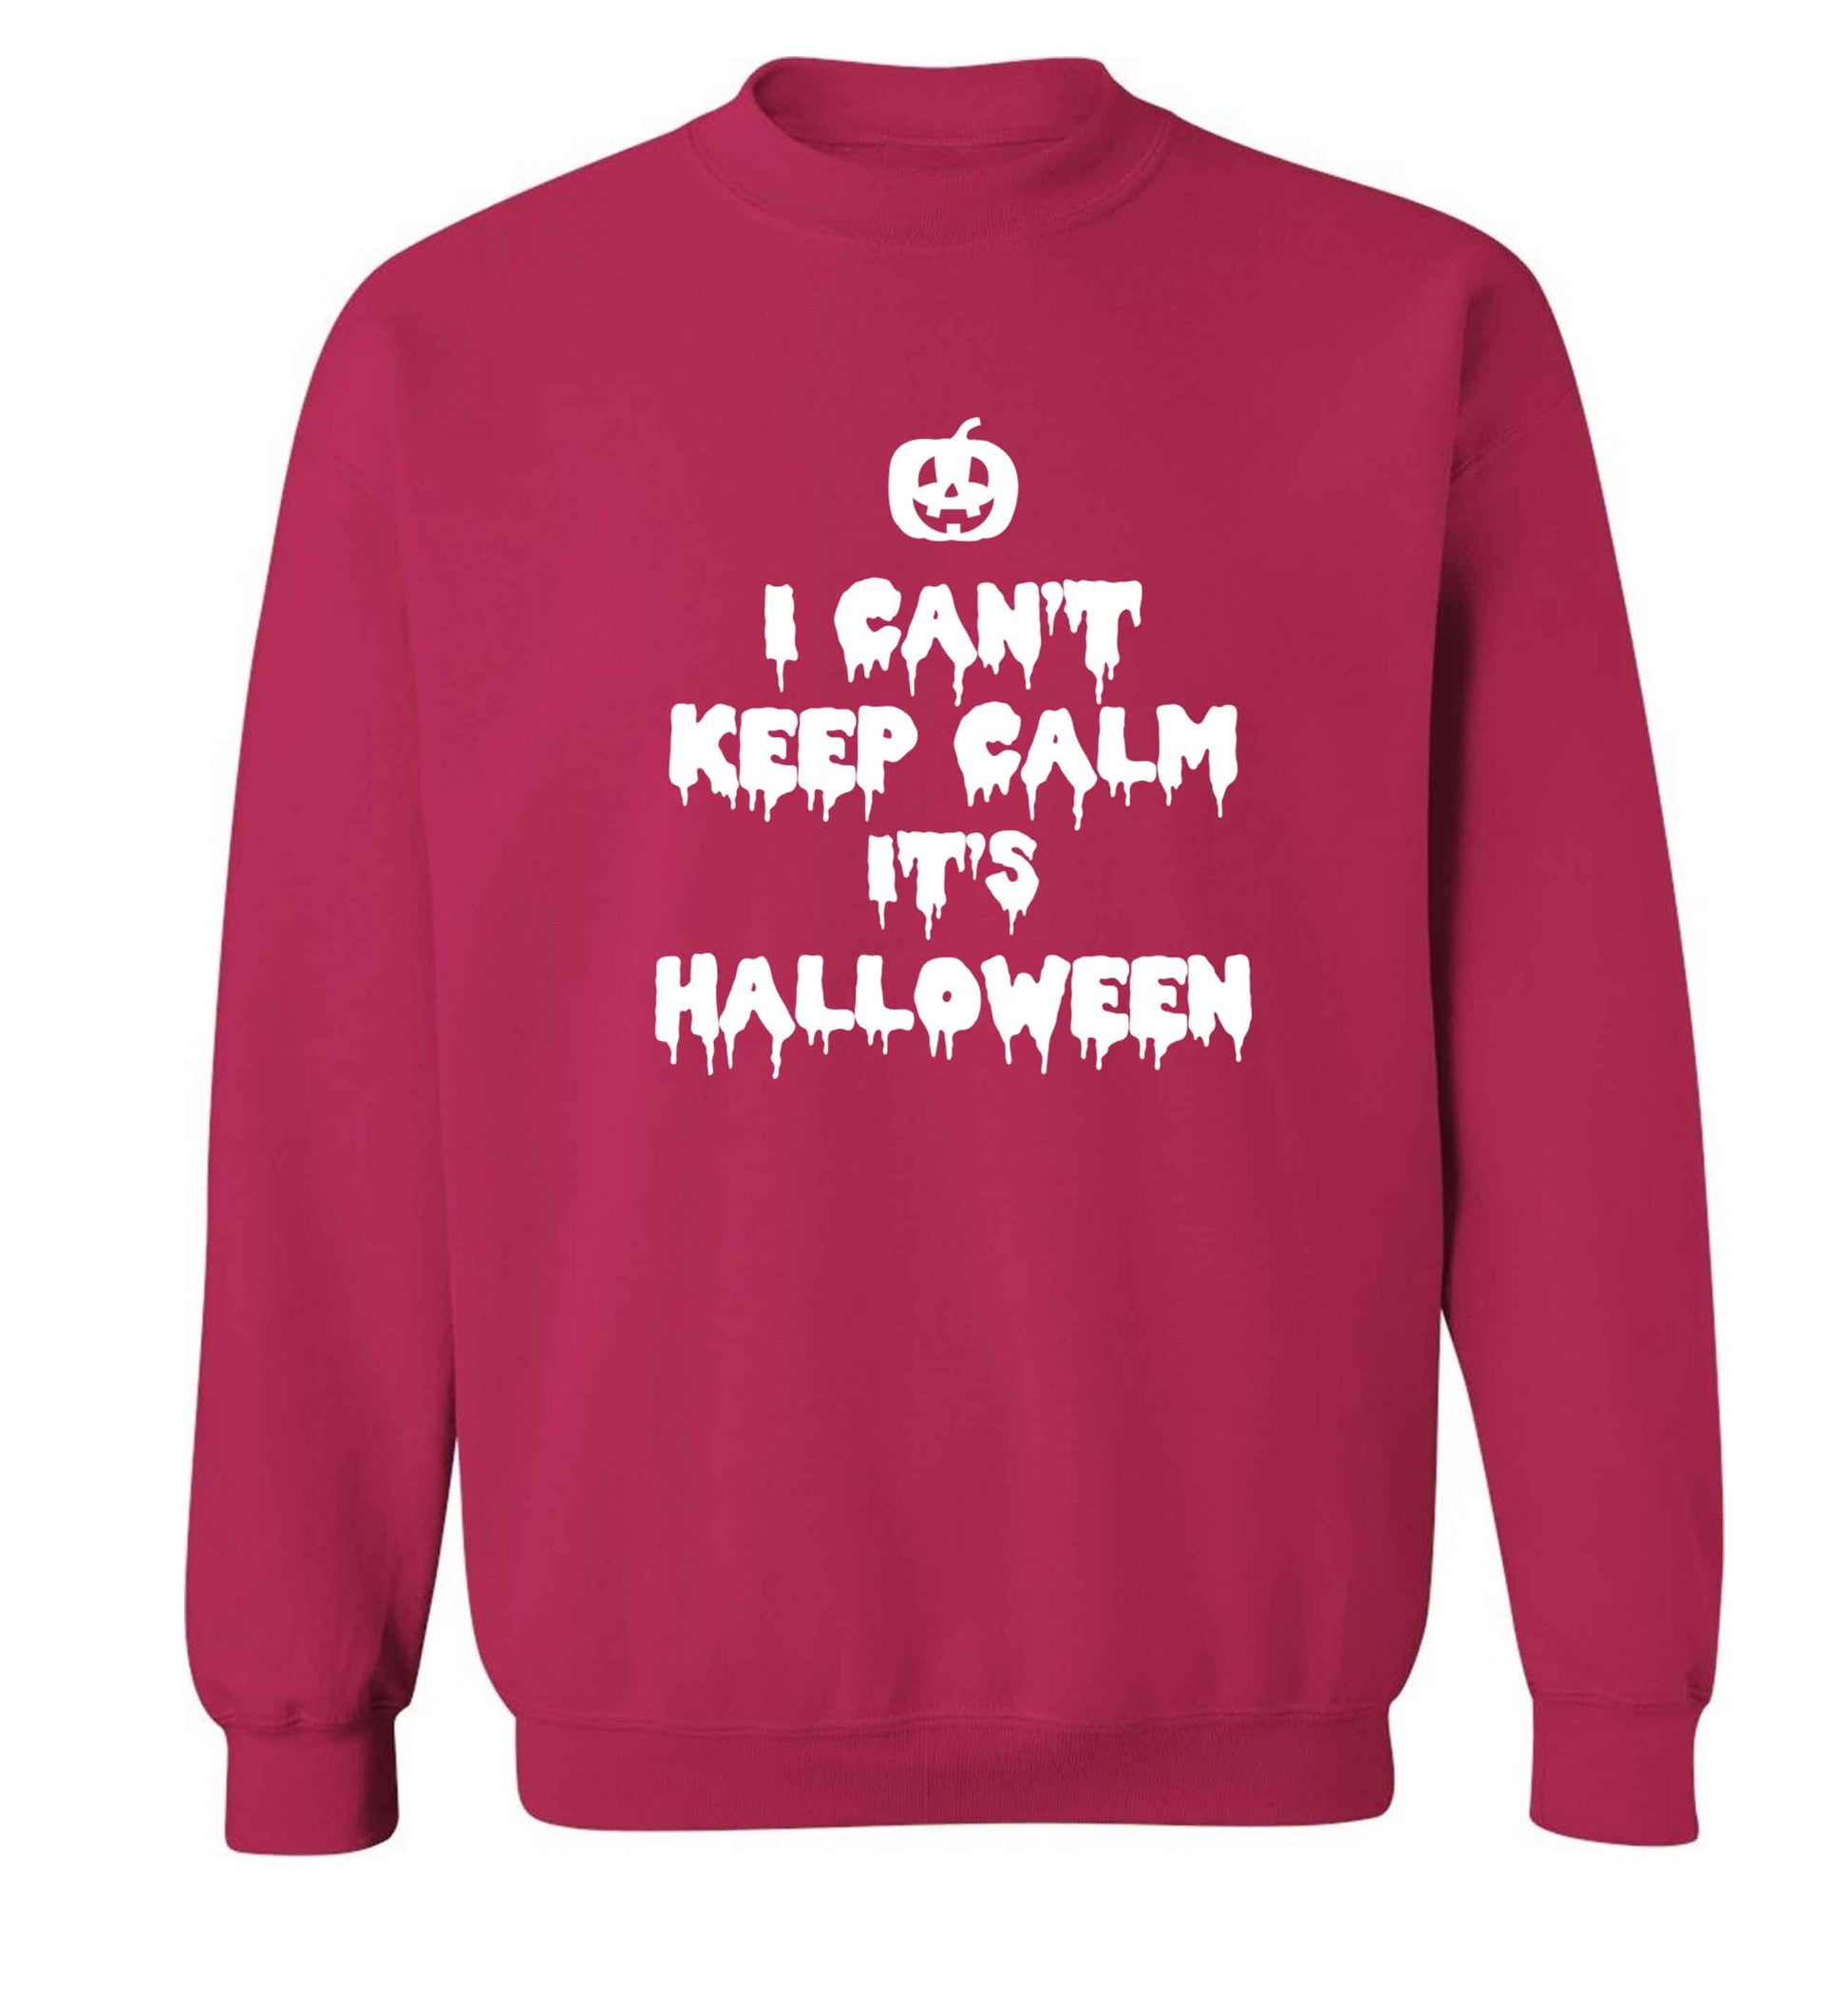 I can't keep calm it's halloween adult's unisex pink sweater 2XL